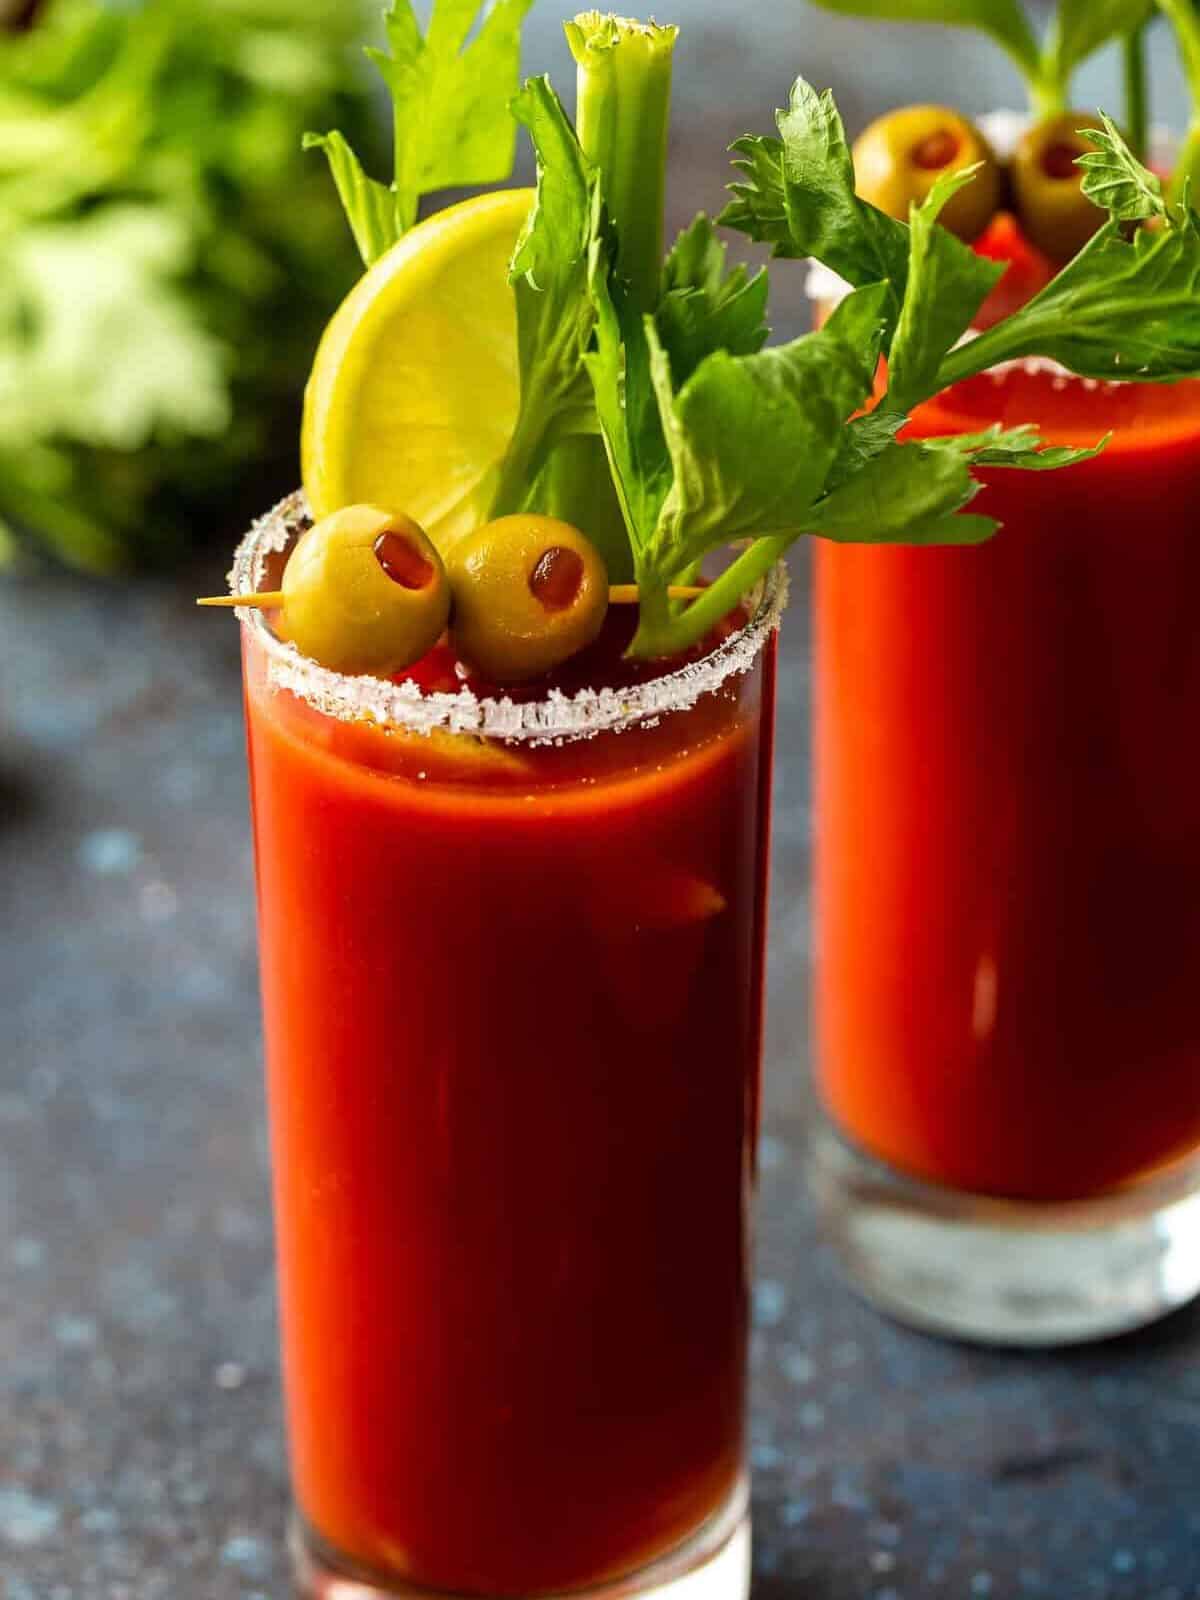 https://www.thecookierookie.com/wp-content/uploads/2023/05/Stovetop-Bloody-Mary-6-edited-1.jpg